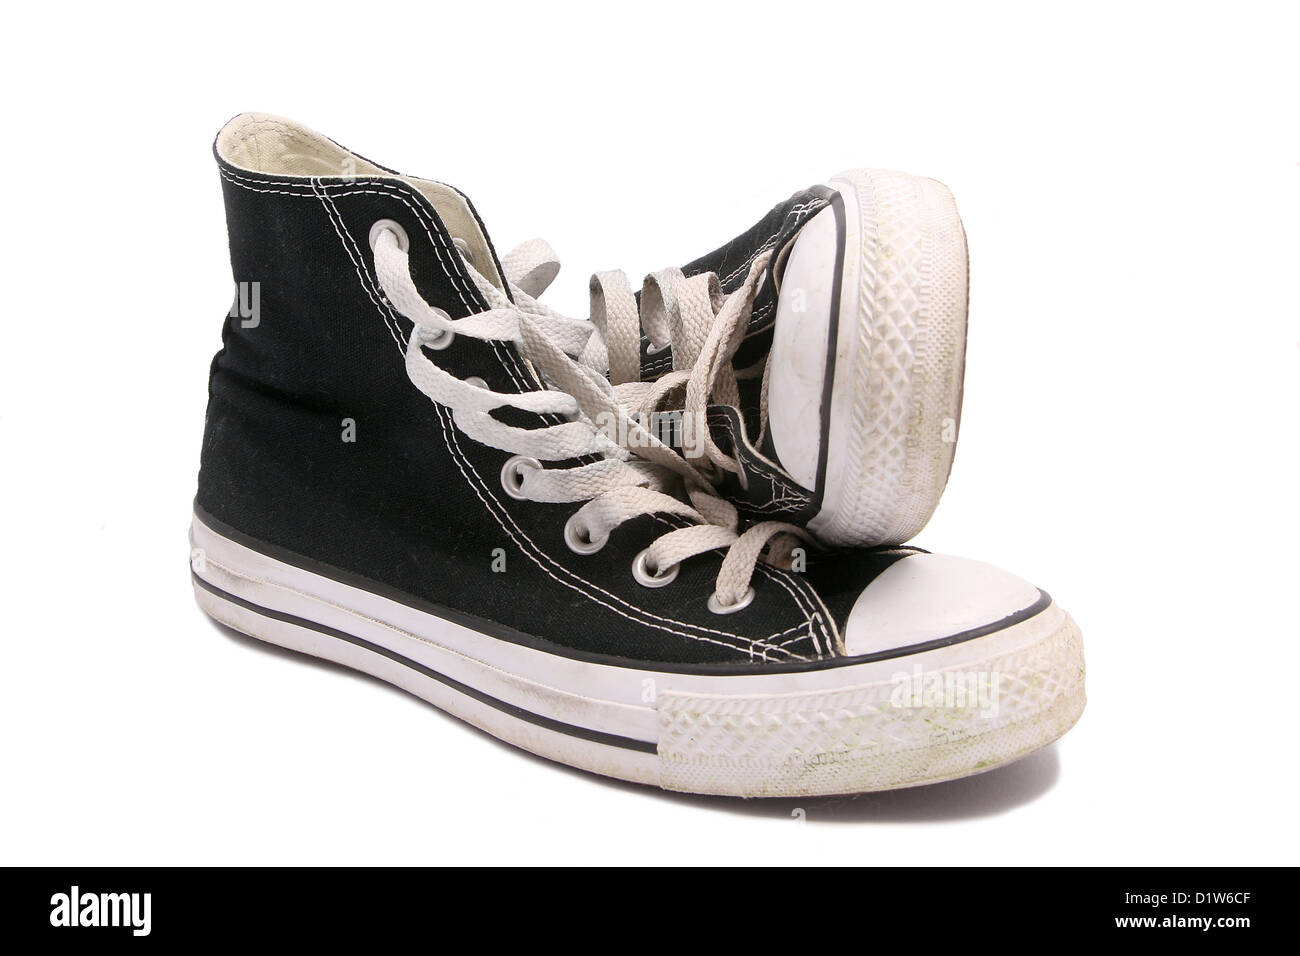 converse type shoes